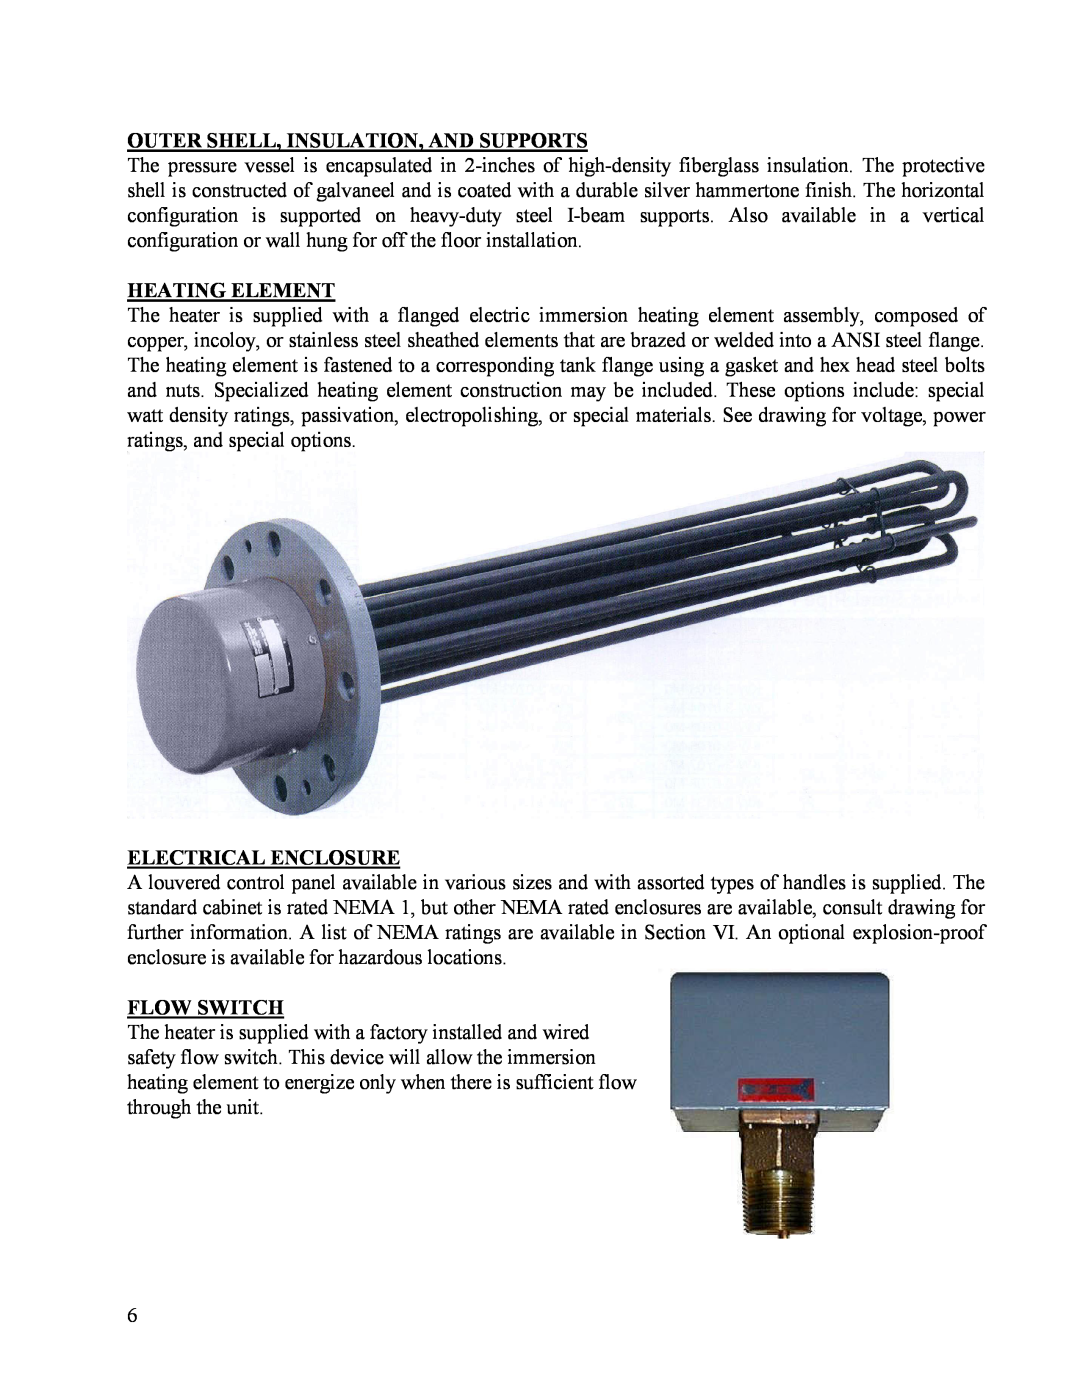 Hubbell CR manual Outer Shell, Insulation, And Supports, Heating Element, Electrical Enclosure, Flow Switch 